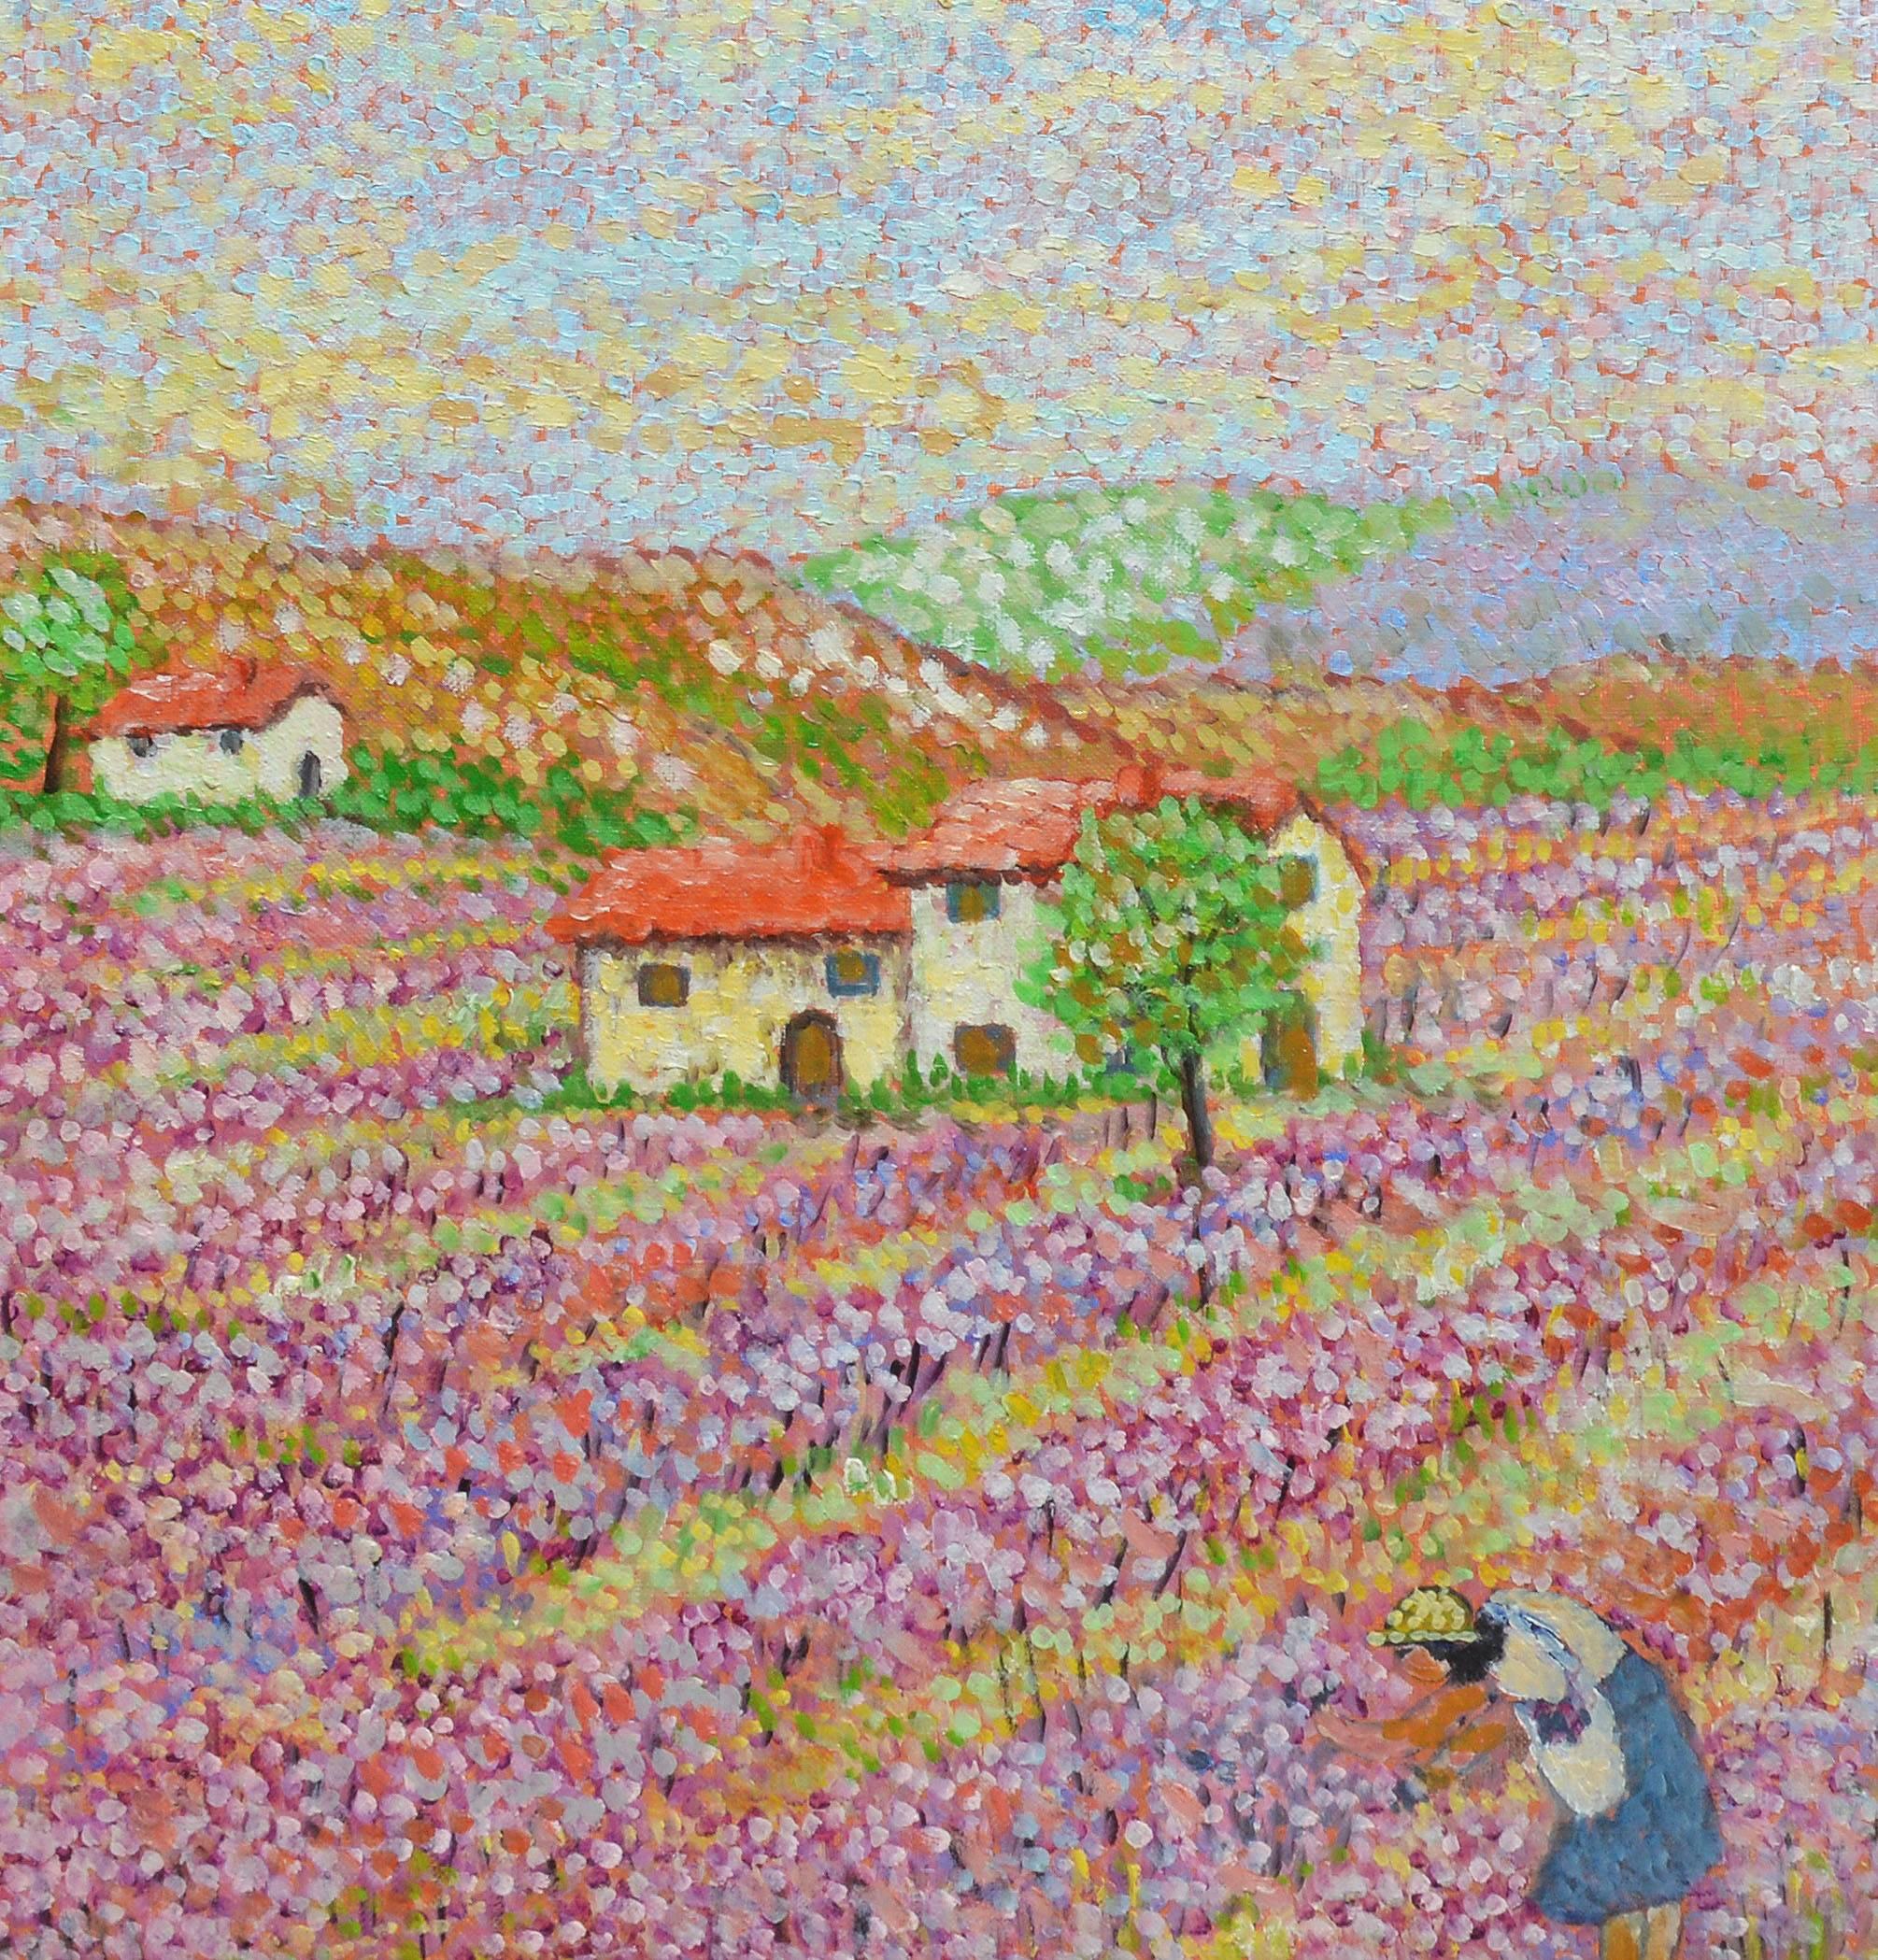 Pointillist flower landscape by Lucia Fortuny  (born 1937).  Oil on canvas, circa 1976.  Signed lower right, Fortuny.    Displayed in a giltwood frame.  Image size, 22